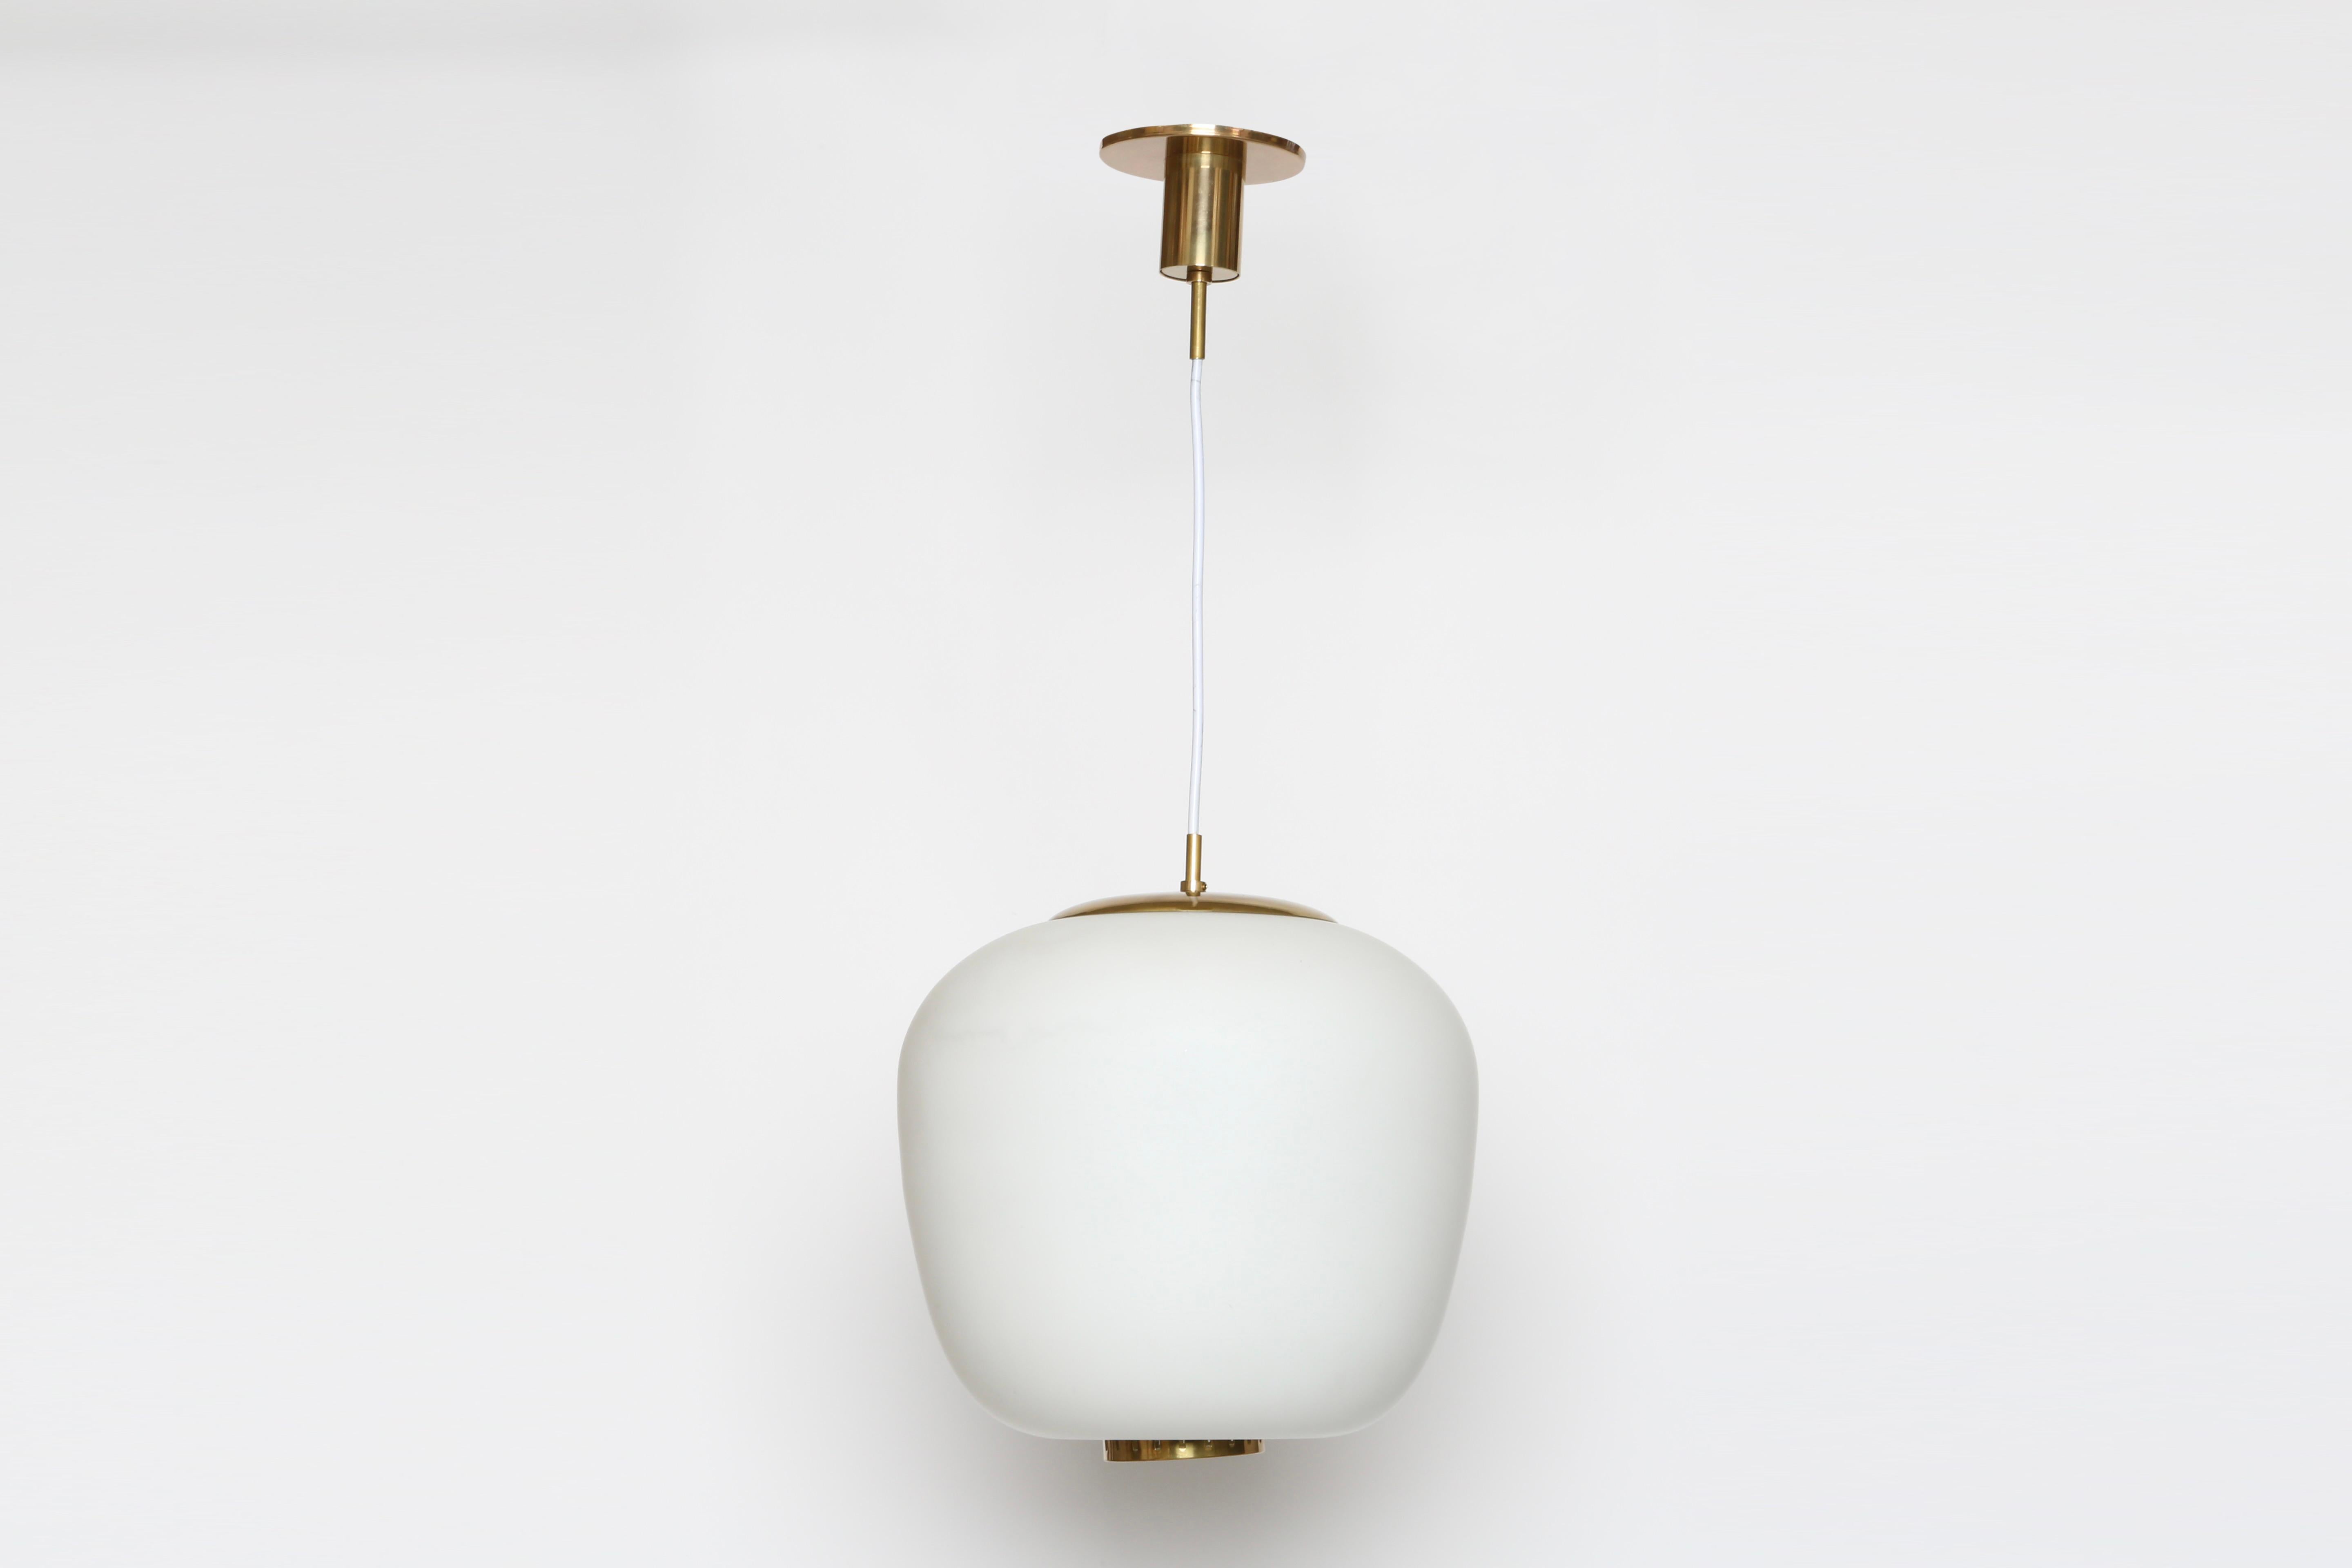 Stilnovo ceiling pendant
Designed and made in Italy, 1960s
Opaline glass, textured glass diffuser.
Rewired for US.
Takes one medium base bulb. 
Overall drop is adjustable.
Height of the glass is 13.5 inches.
Beautifully refinished brass.